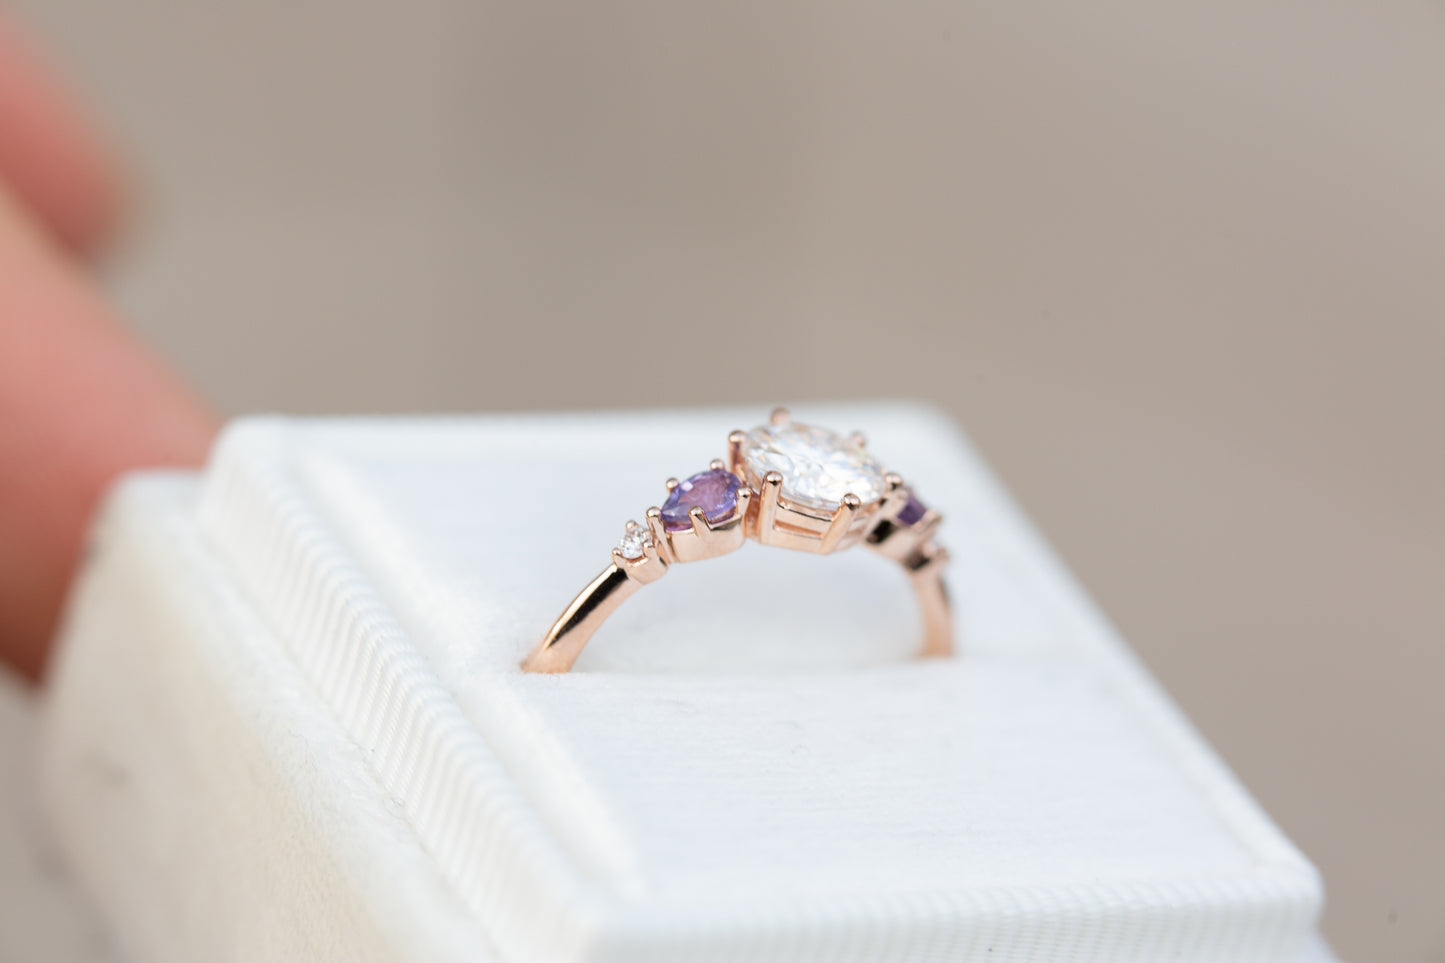 Load image into Gallery viewer, Round moissanite five stone ring with purple sapphires
